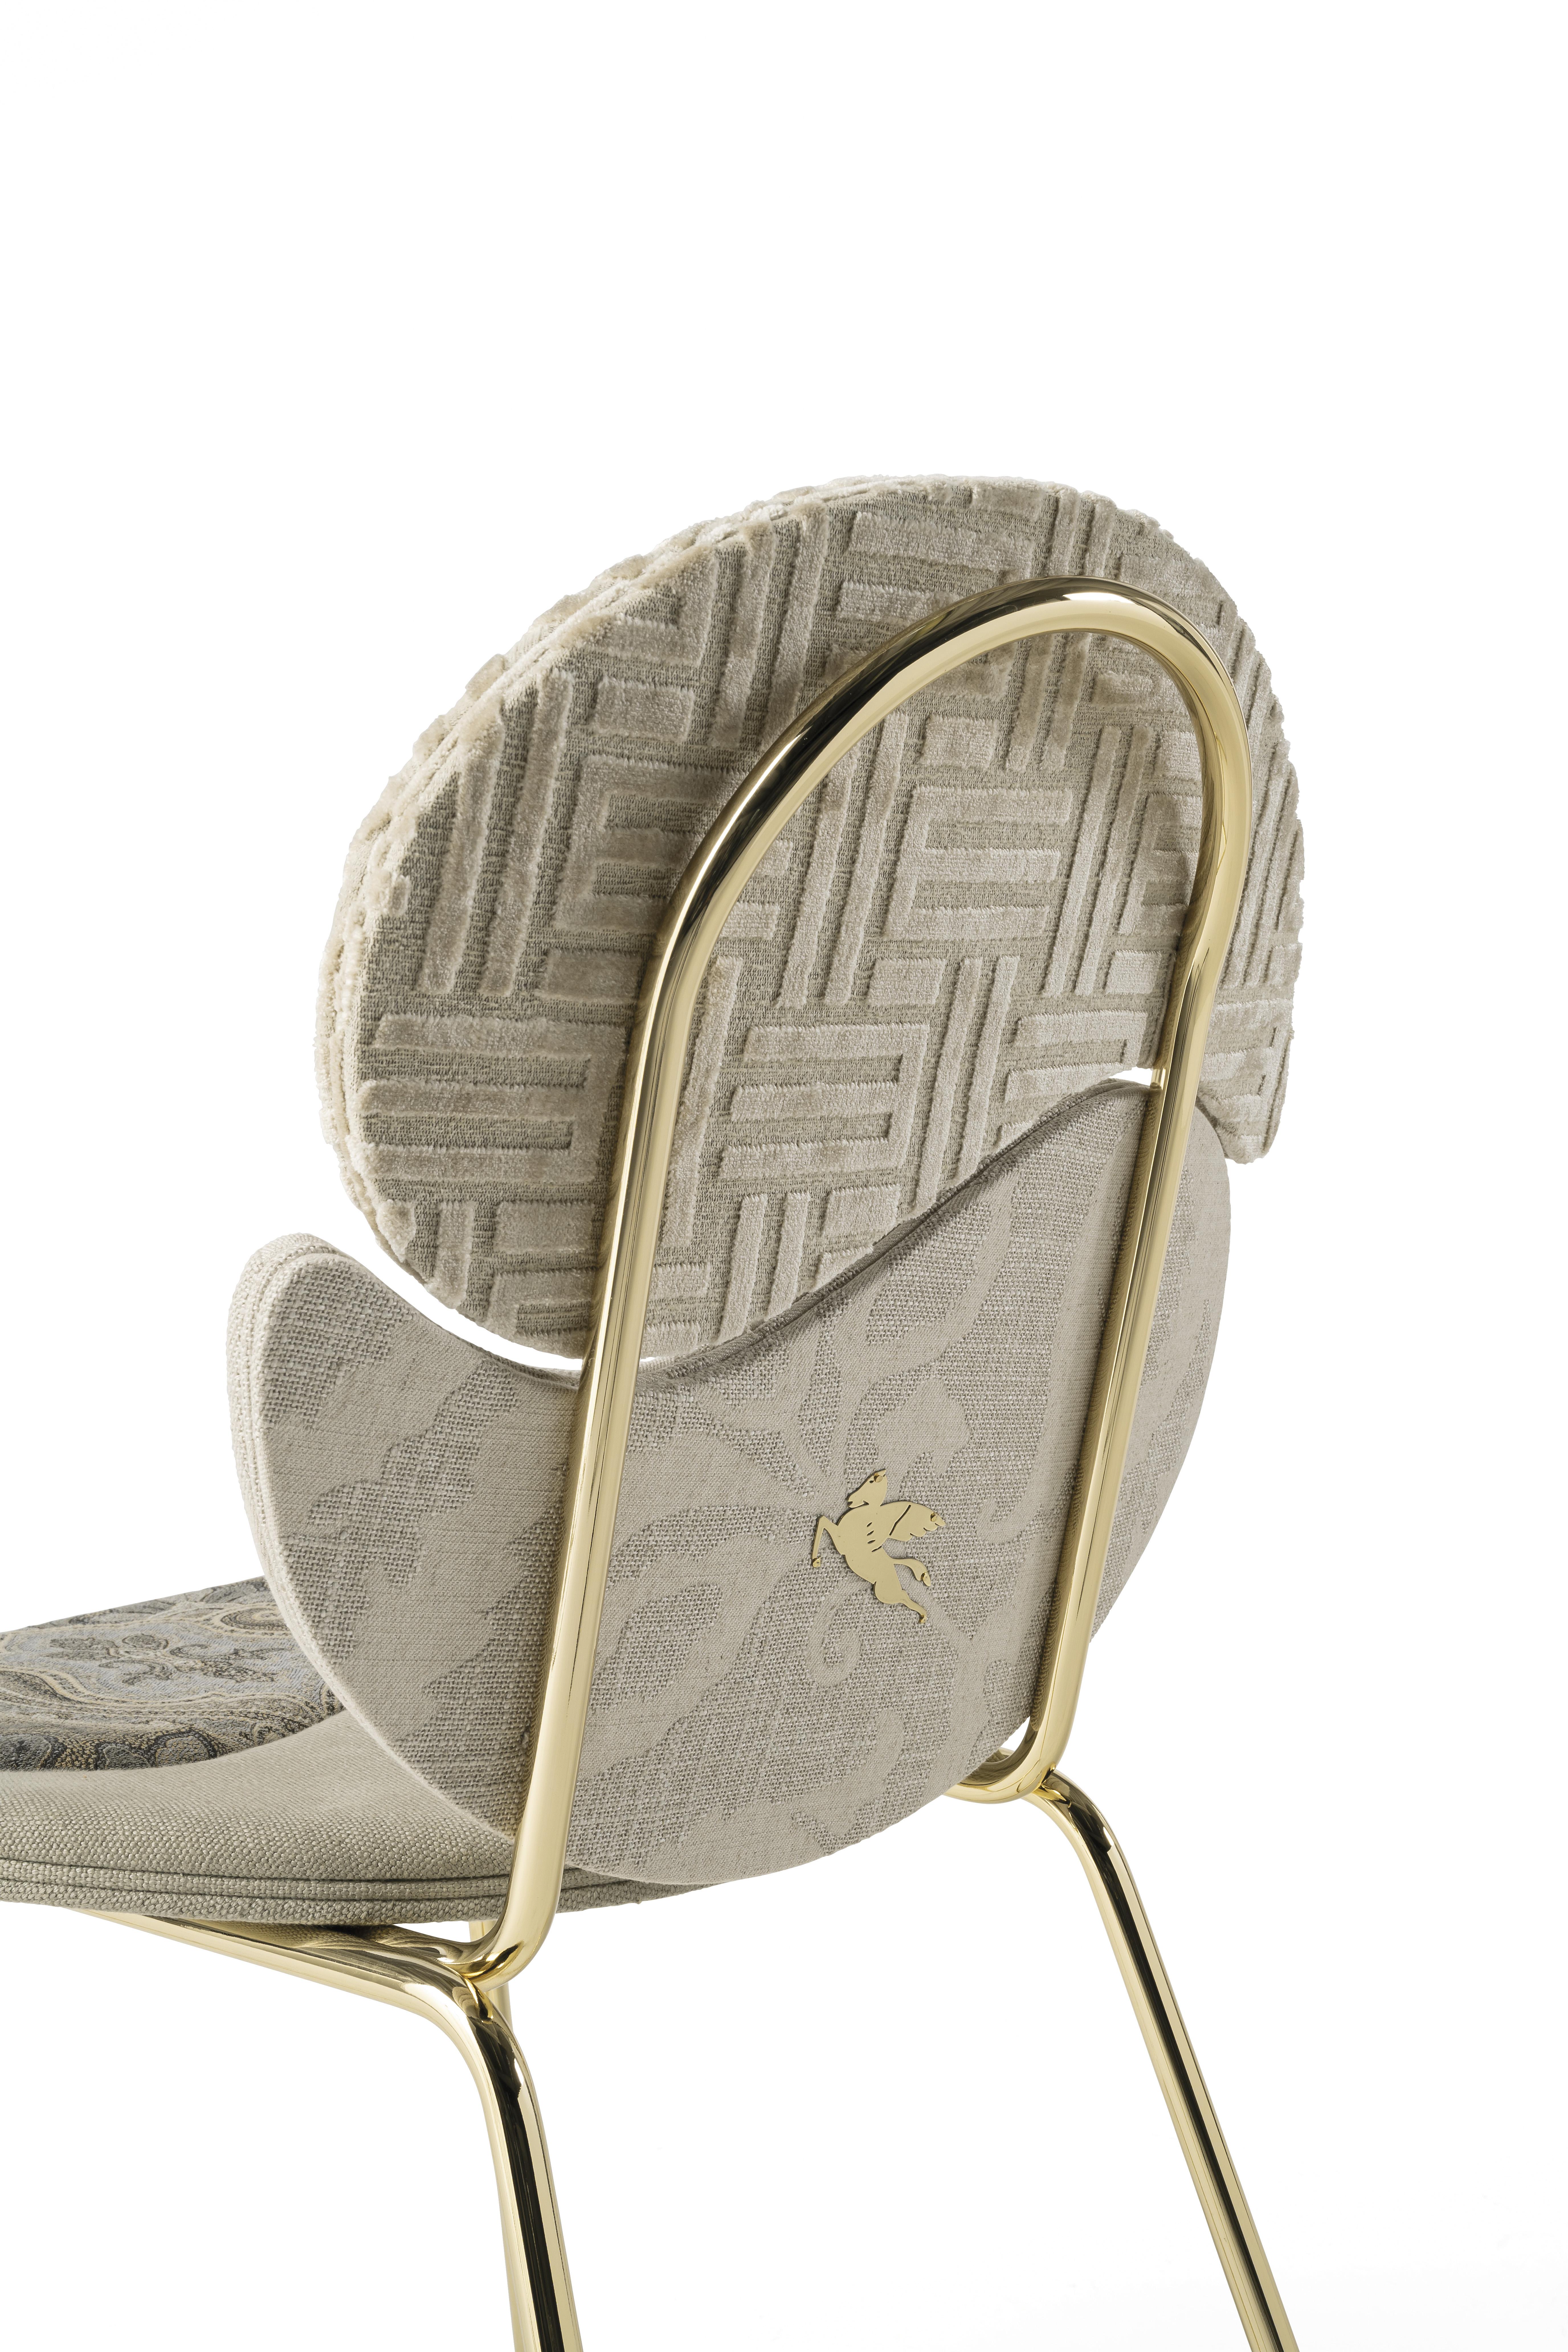 Italian 21st Century Shiraz Chair with Double Paisley by Etro Home Interiors For Sale